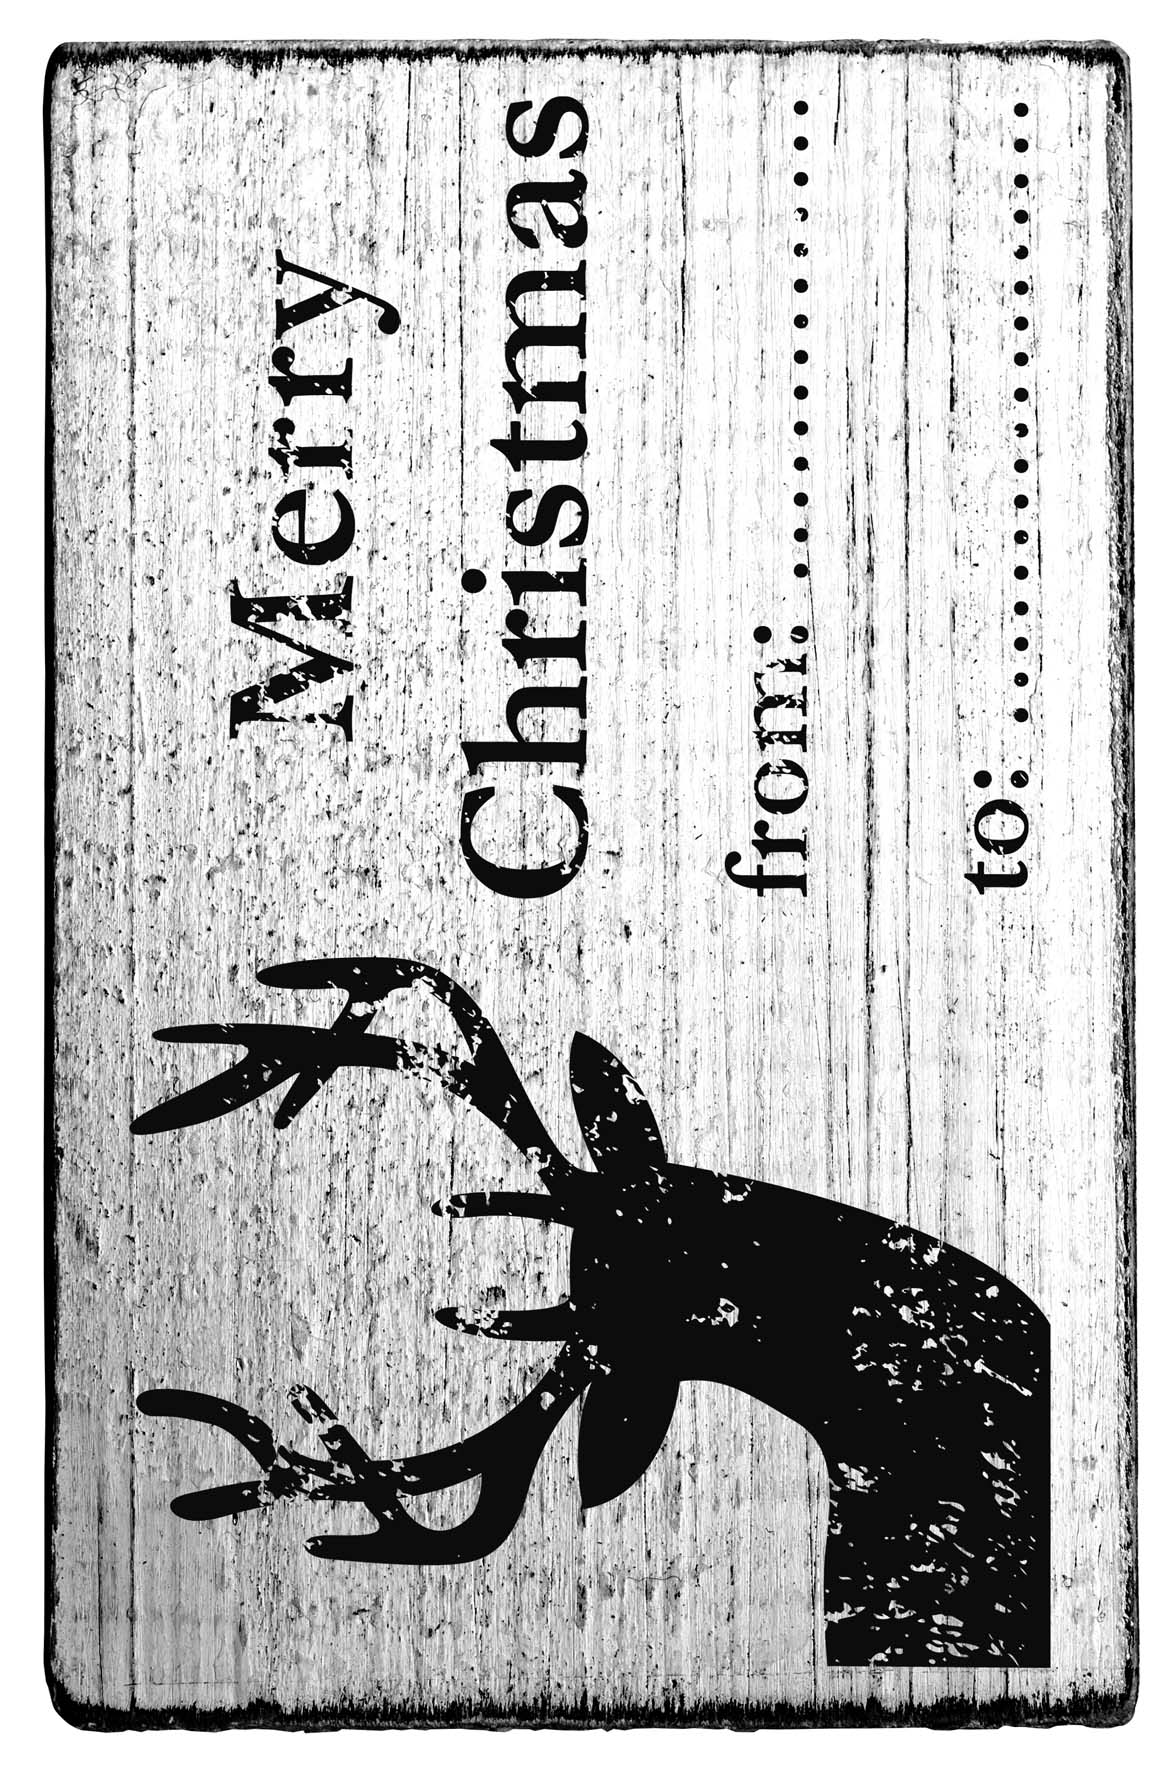 Vintage - Merry Christmas from .... to .... - V-01056